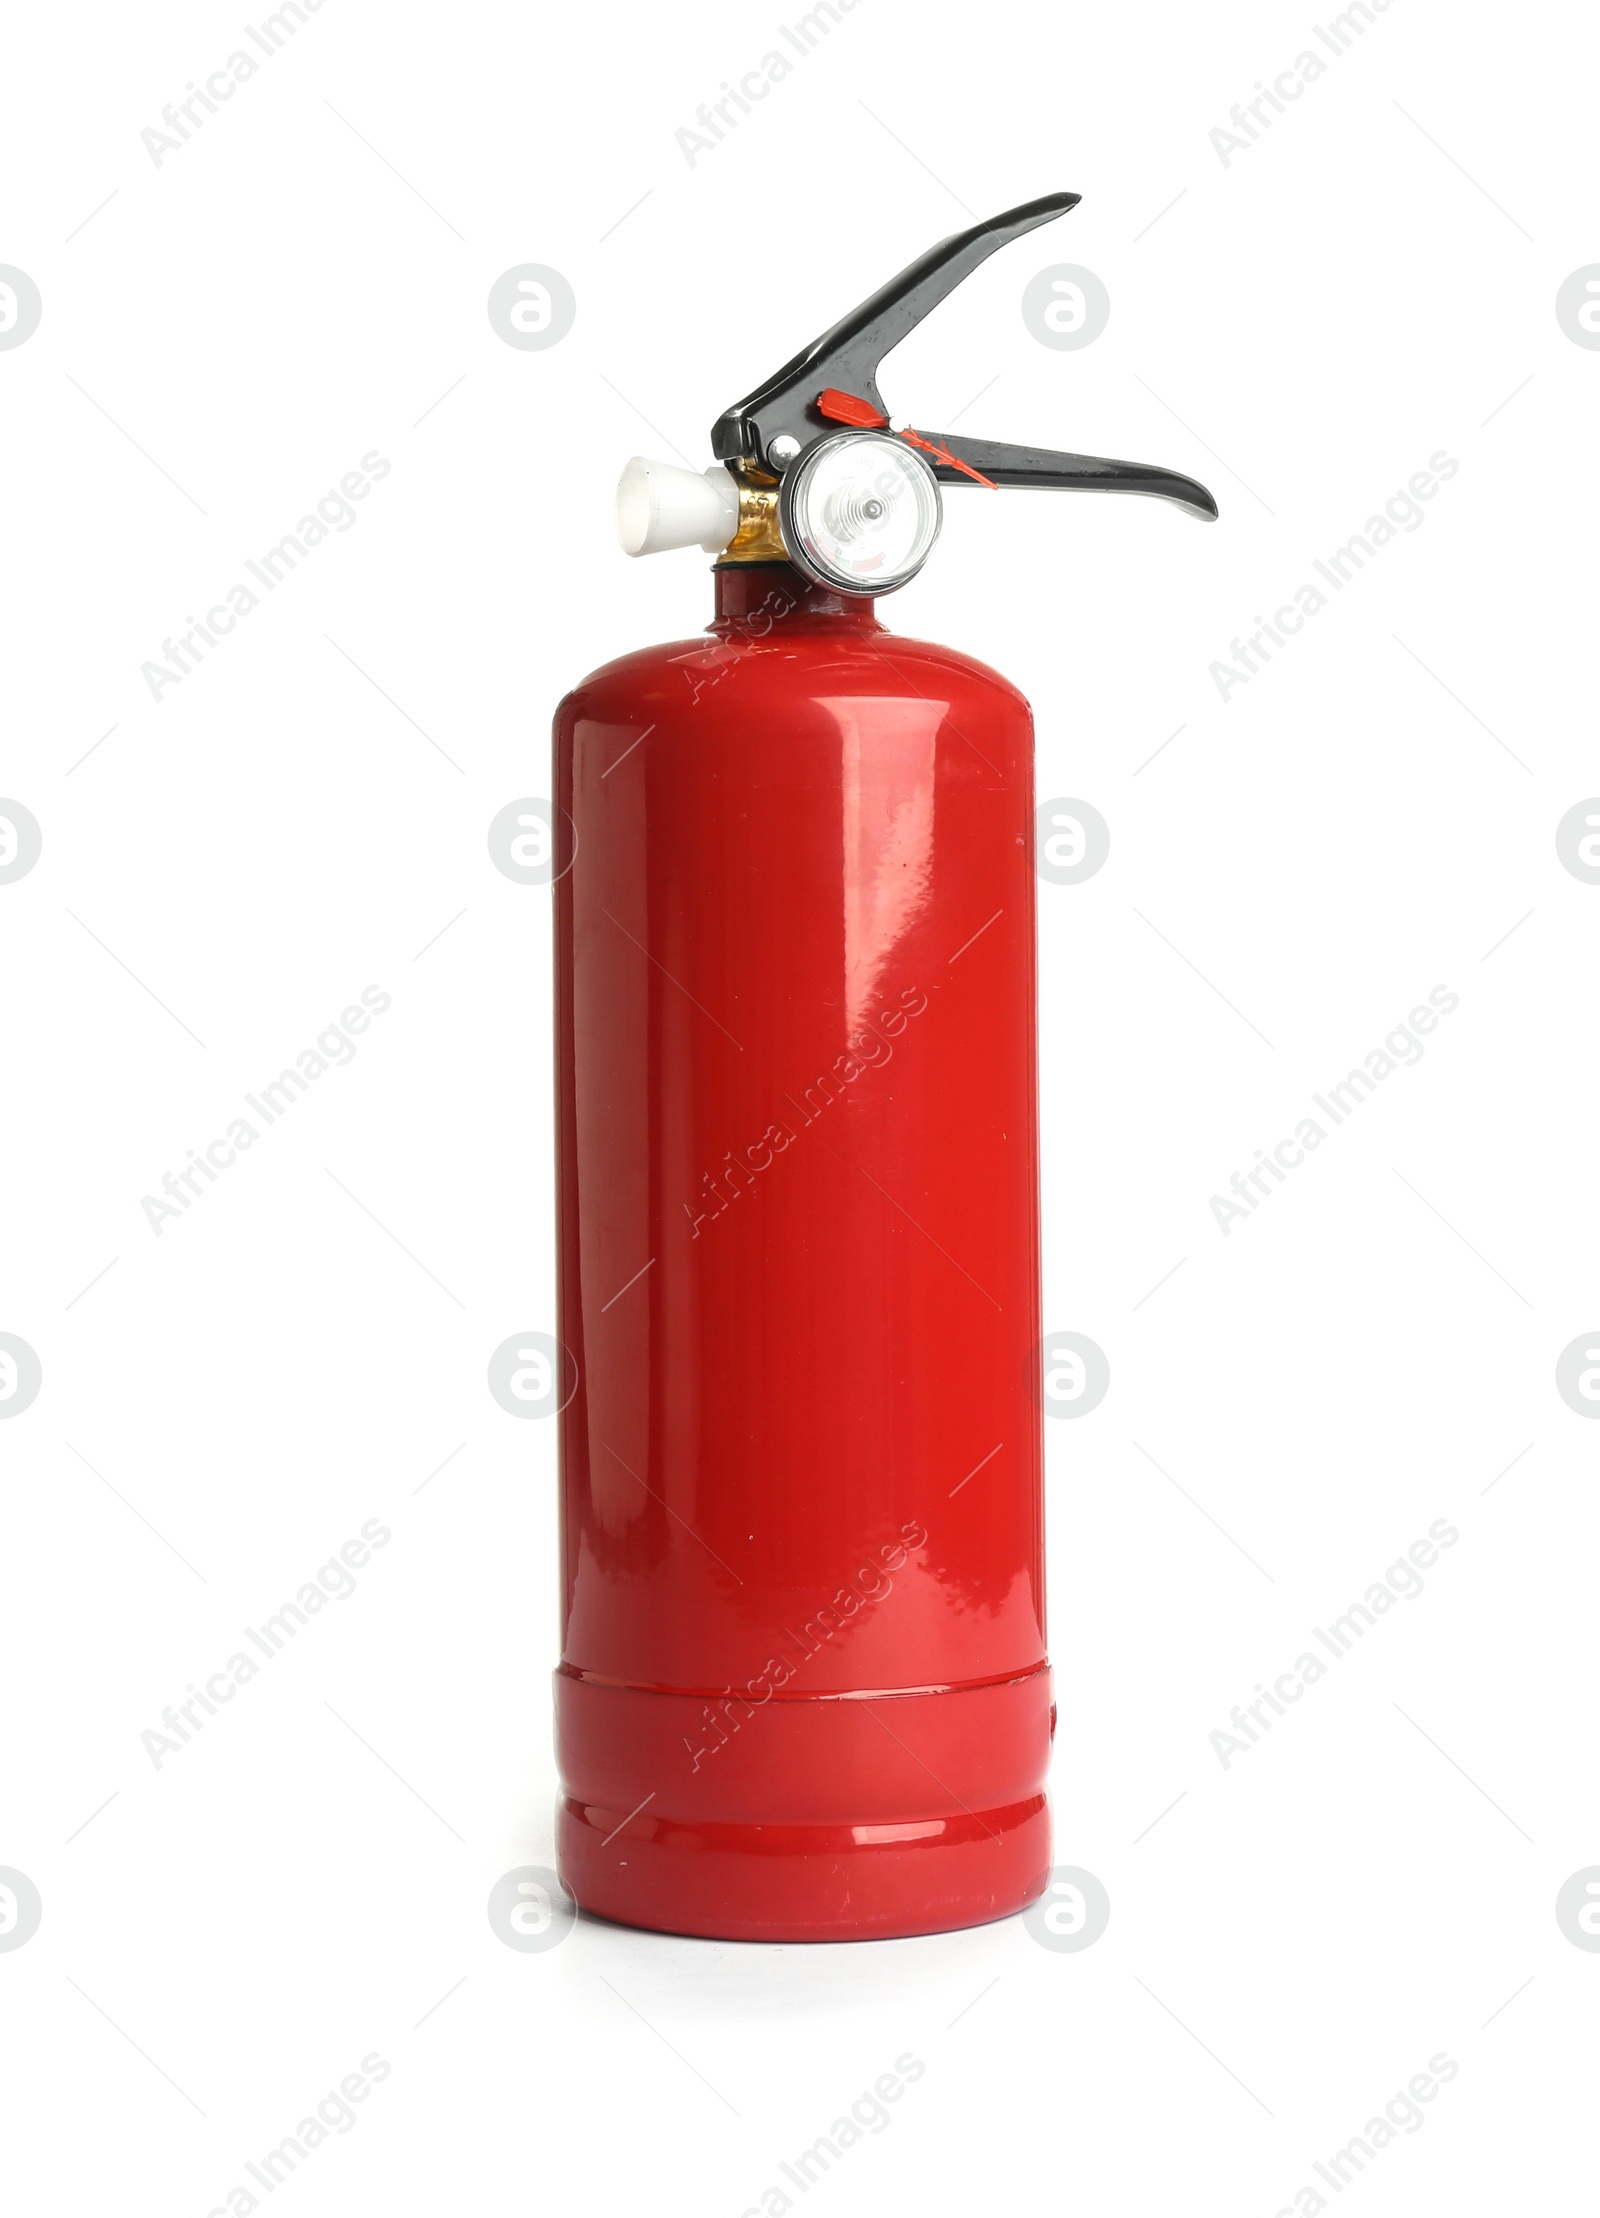 Photo of Fire extinguisher on white background. Safety tools for construction